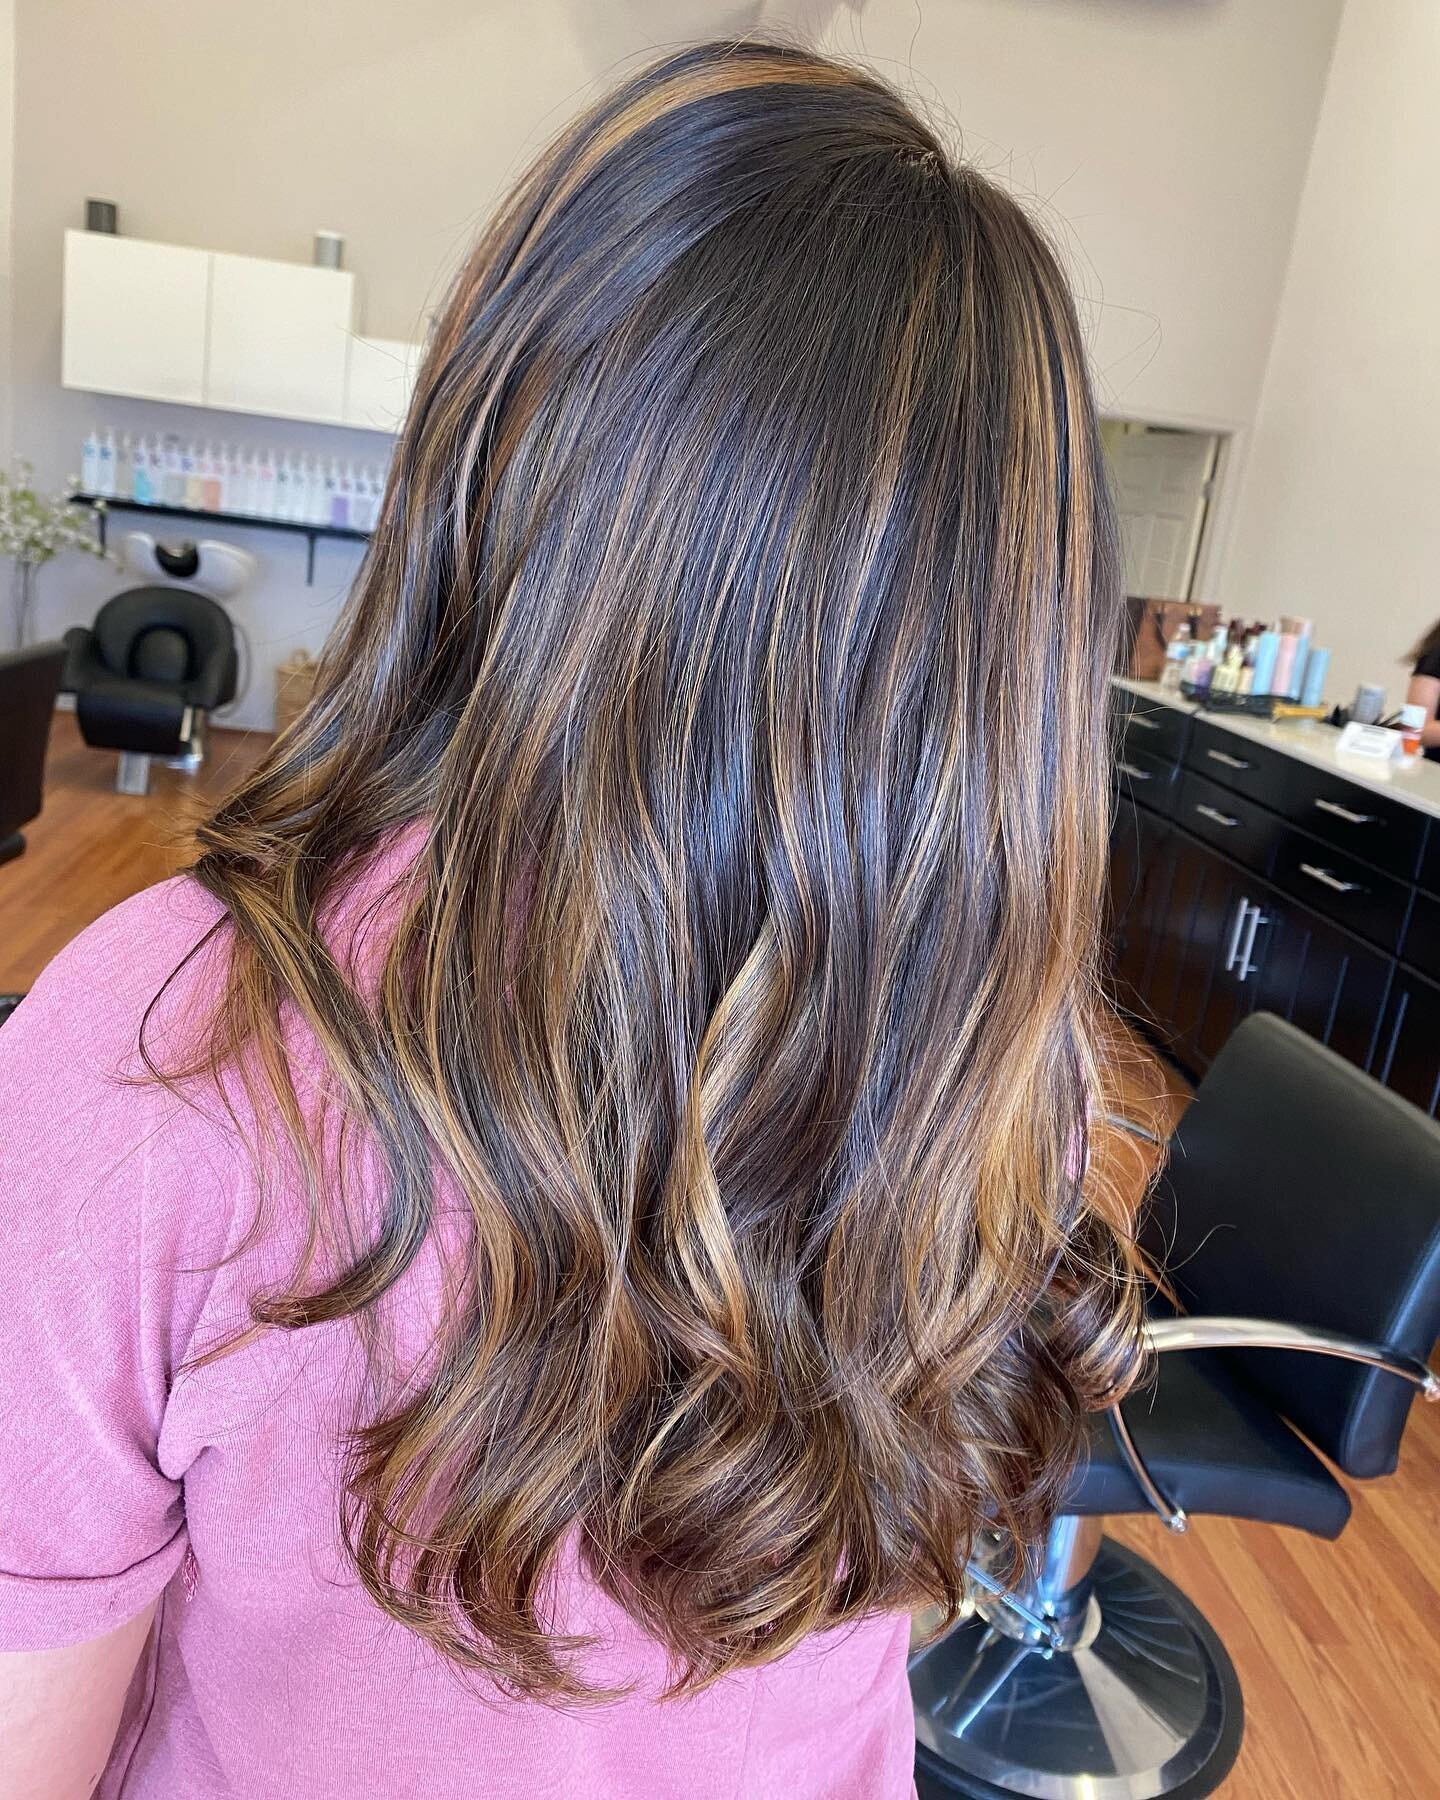 The more you know!!
◾️Did you know that Foils can be used to create a #balayage effect. 
◼️A #balayage is typically a higher investment than a traditional hilight, because the placement requires more product and profound creativity, resulting in a se